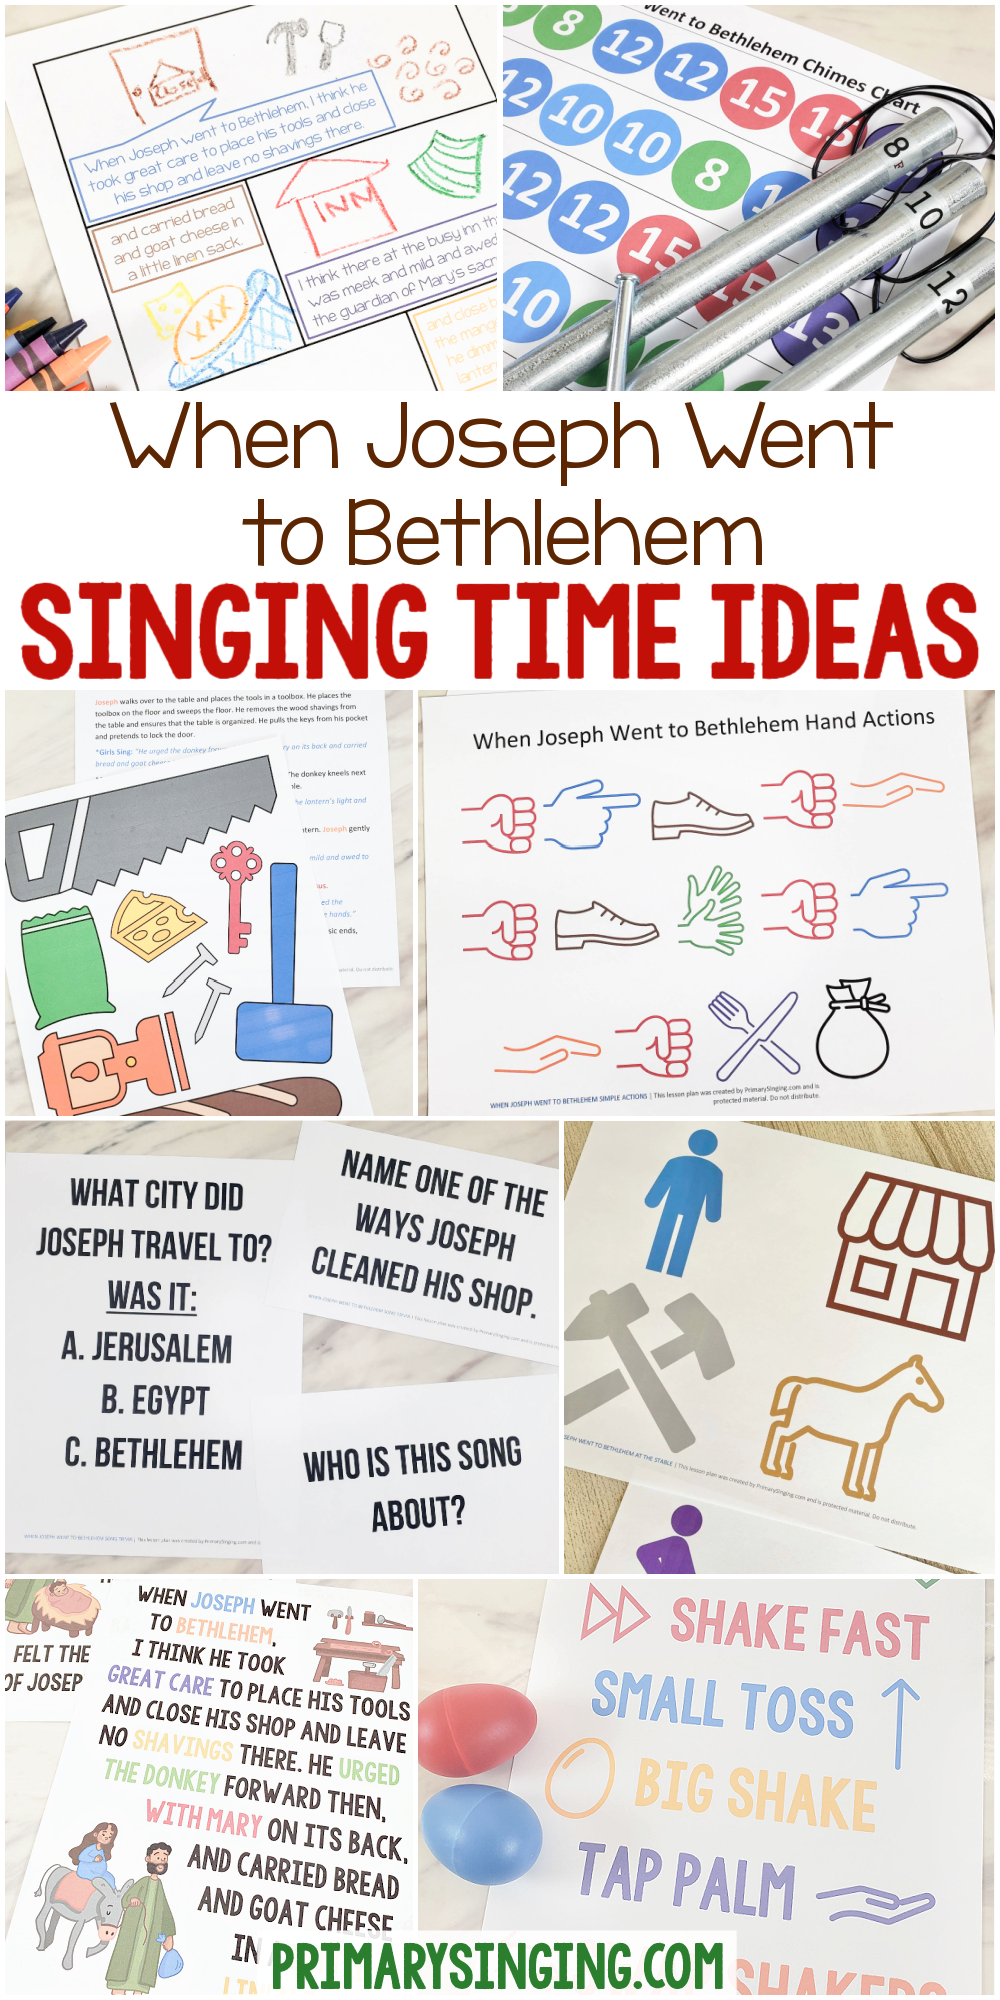 When Joseph Went to Bethlehem Singing Time Ideas - Lots of fun ways to teach this Primary Christmas song including comic strip, pipe chimes, hand actions, song trivia, egg shakers, art flip chart and many more! A great resource list for LDS Primary music leaders.